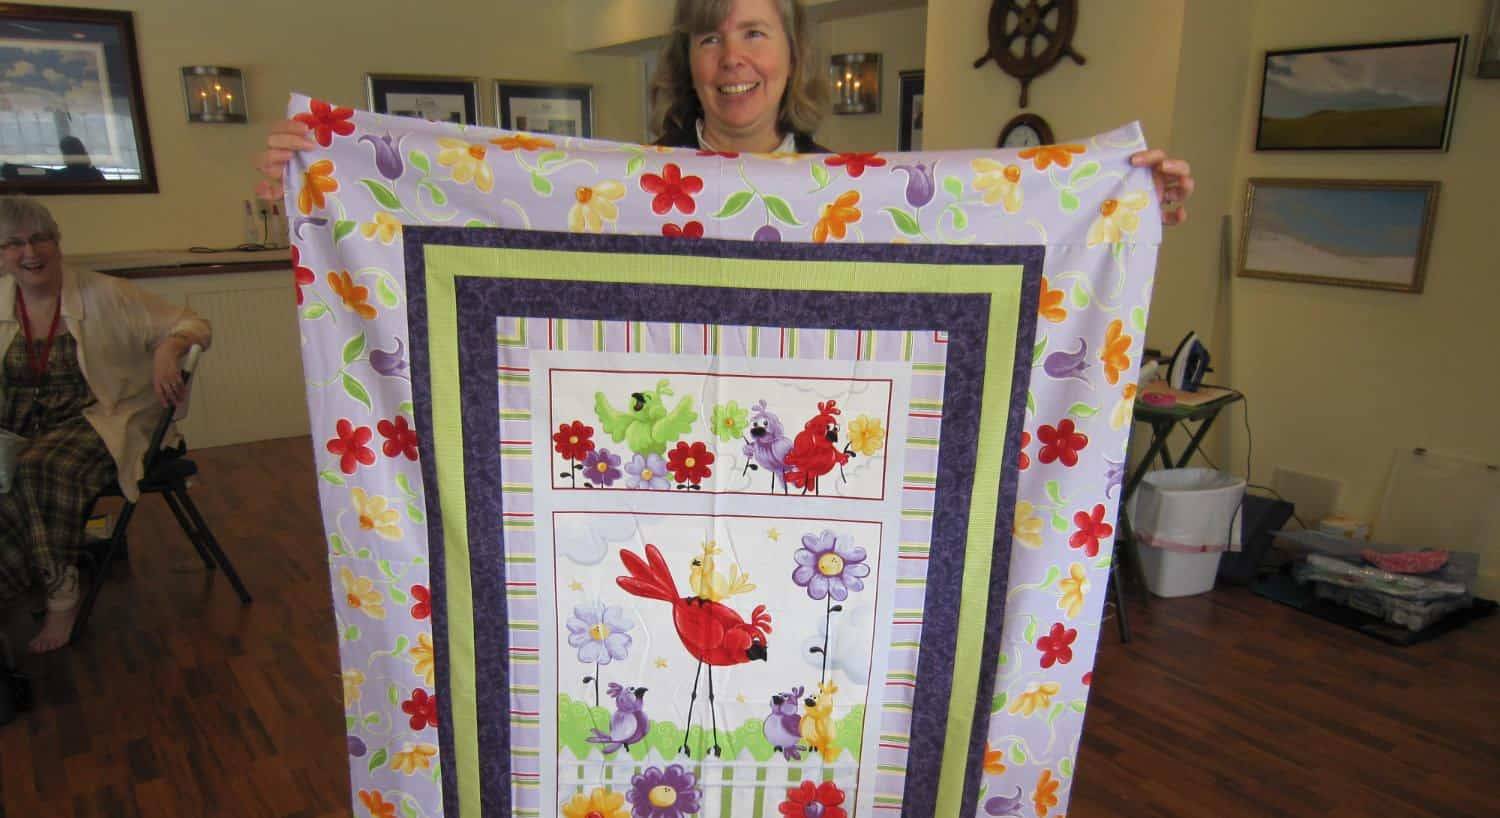 Lady holding a quilt with red, purple and yellow birds and red, purple, yellow, and orange flowers